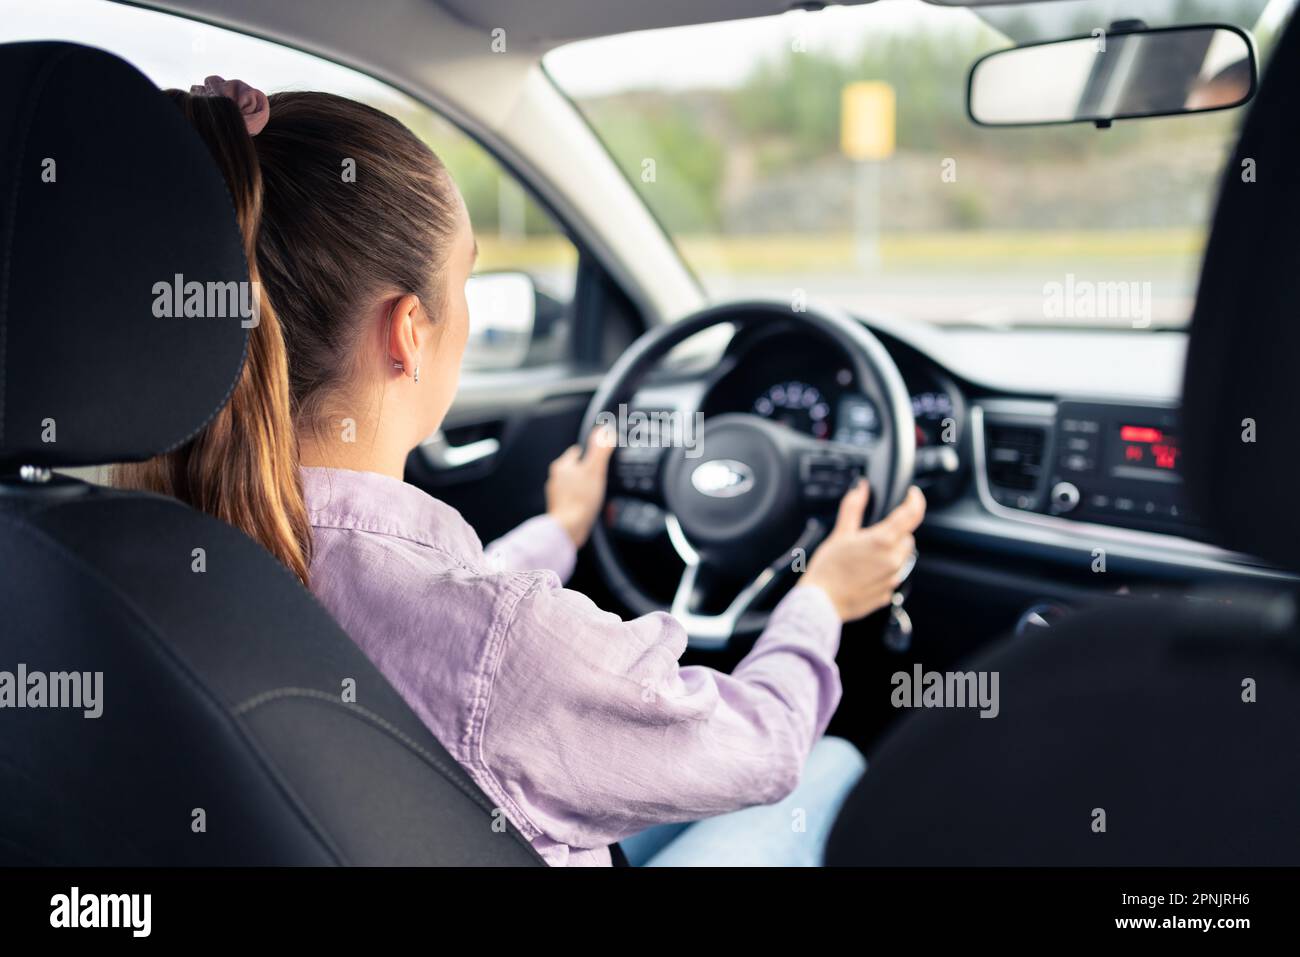 Woman driving car. Young driver. Testing vehicle in dealership or student training in school to get license. Hands on steering wheel. Stock Photo